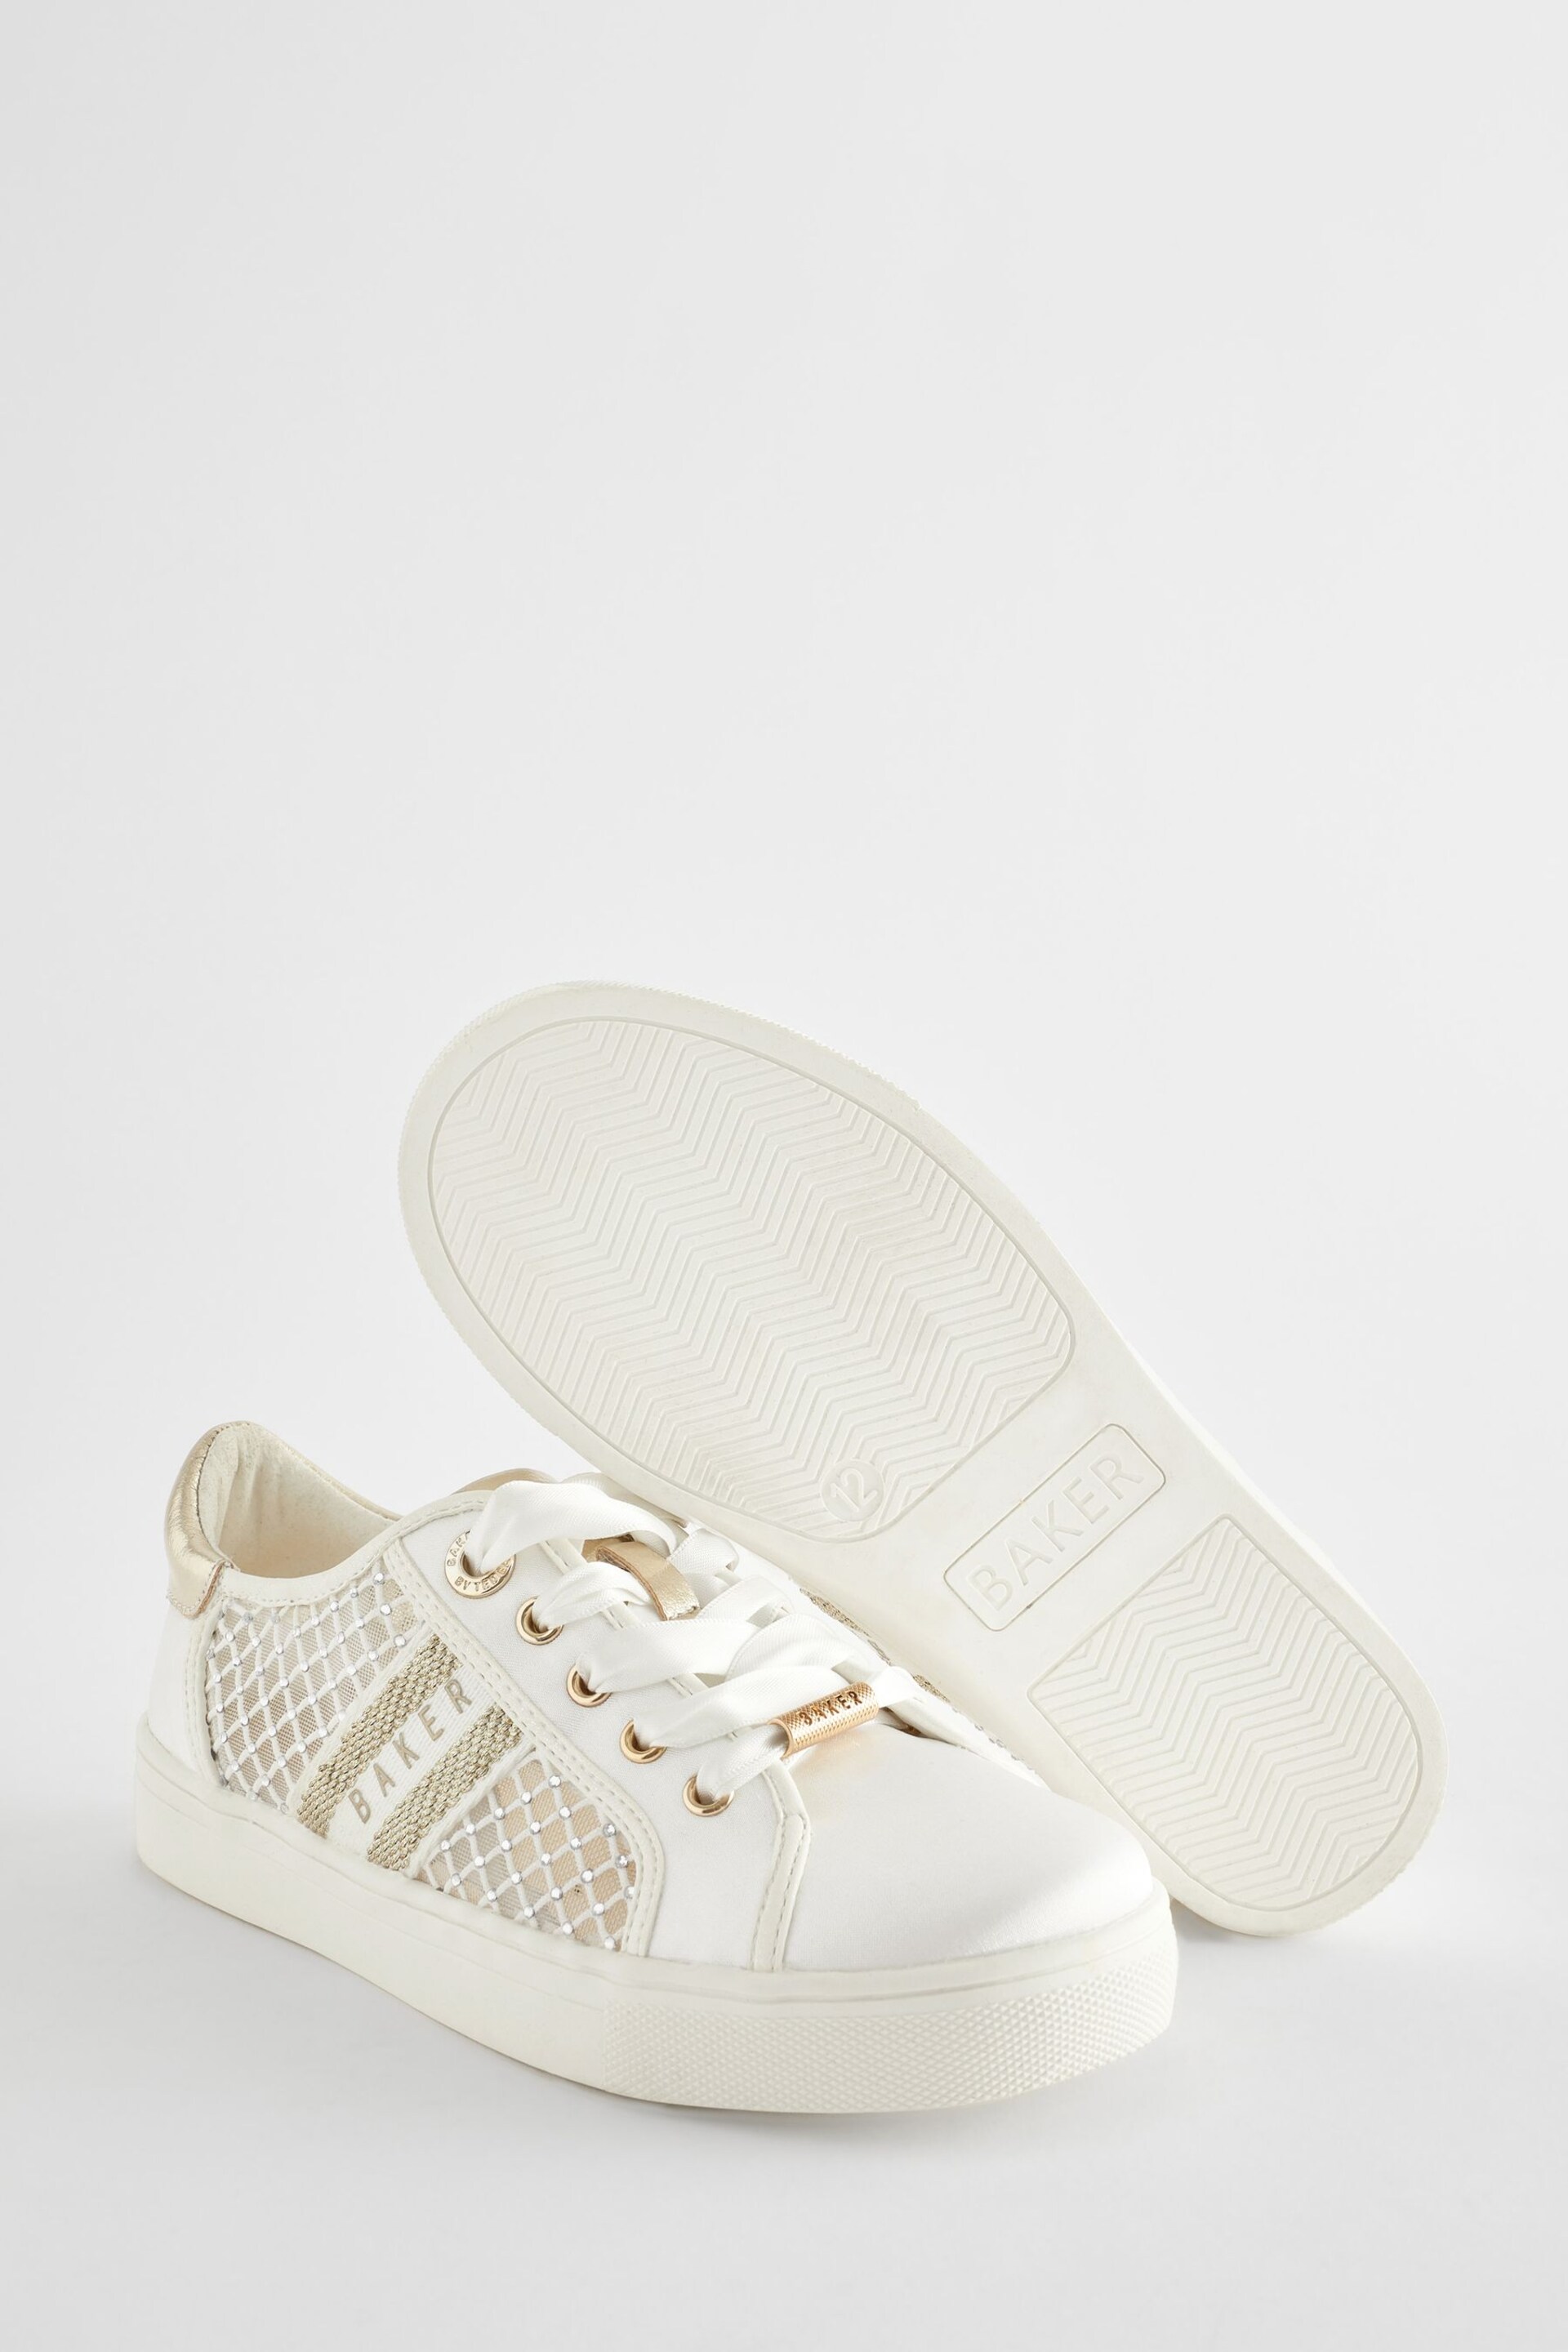 Baker by Ted Baker Girls Diamanté Lace Up Trainers - Image 5 of 7